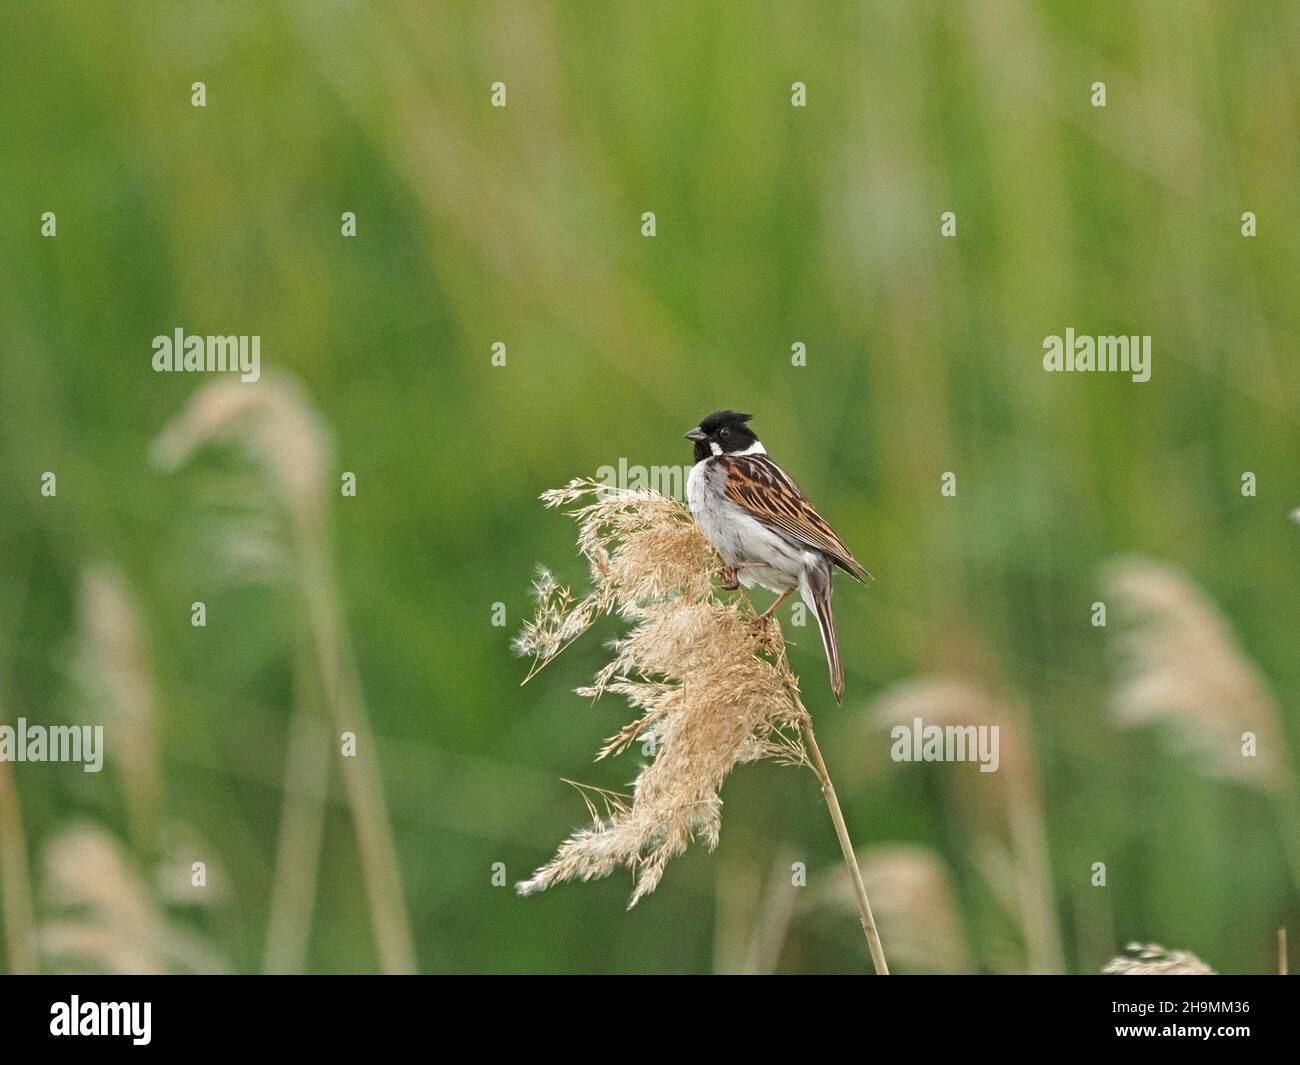 male Reed Bunting (Emberiza schoeniclus) in breeding plumage on fluffy seed-head in reedbed at St Aidan's RSPB Nature Reserve,Yorkshire, England,UK Stock Photo